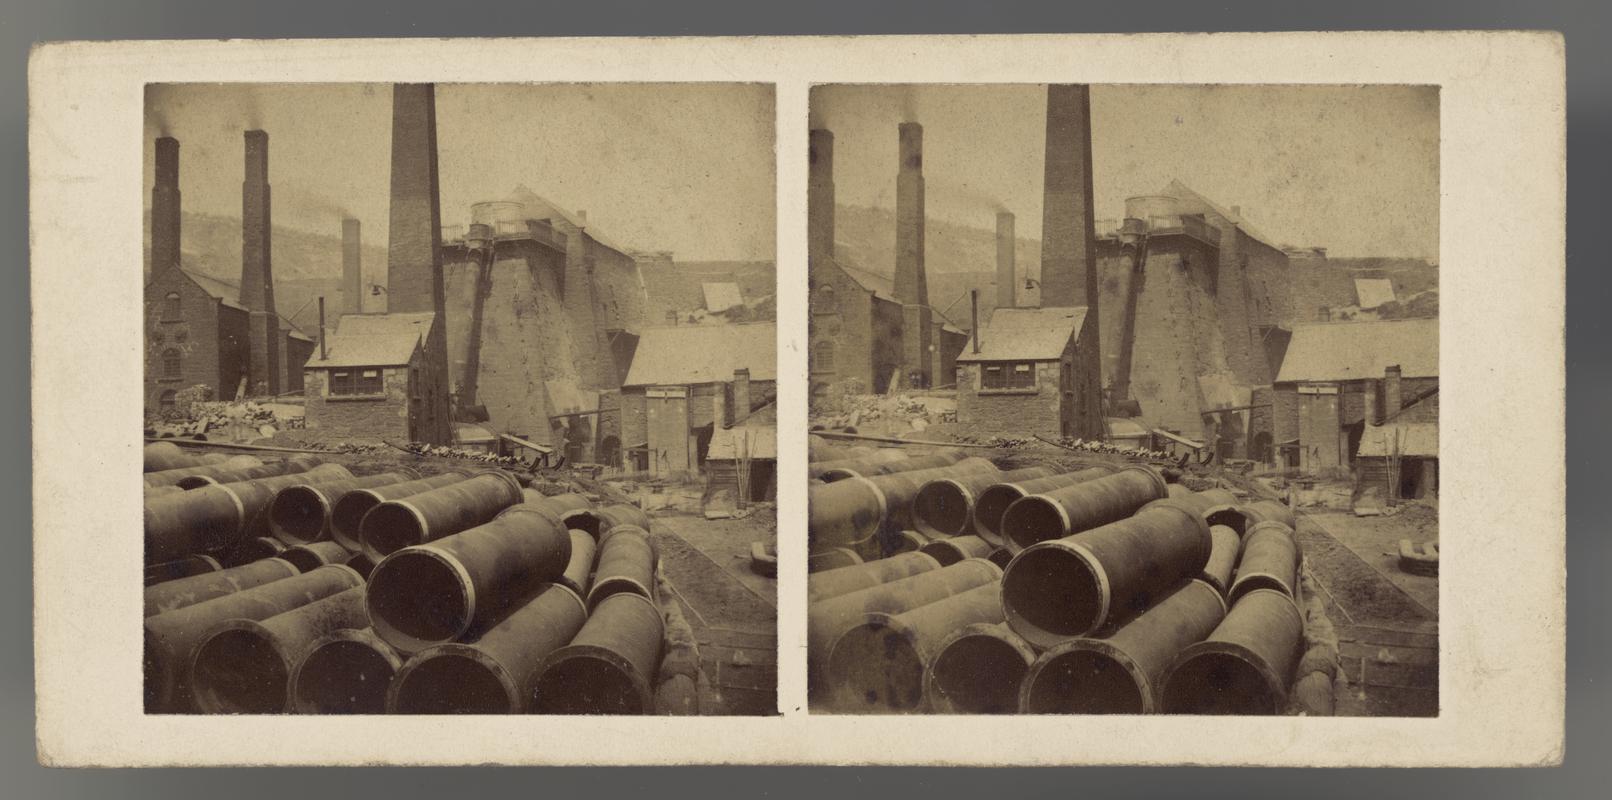 Stereoscopic photo card showing stacks of pipes with a blast furnace in the background, Brymbo.